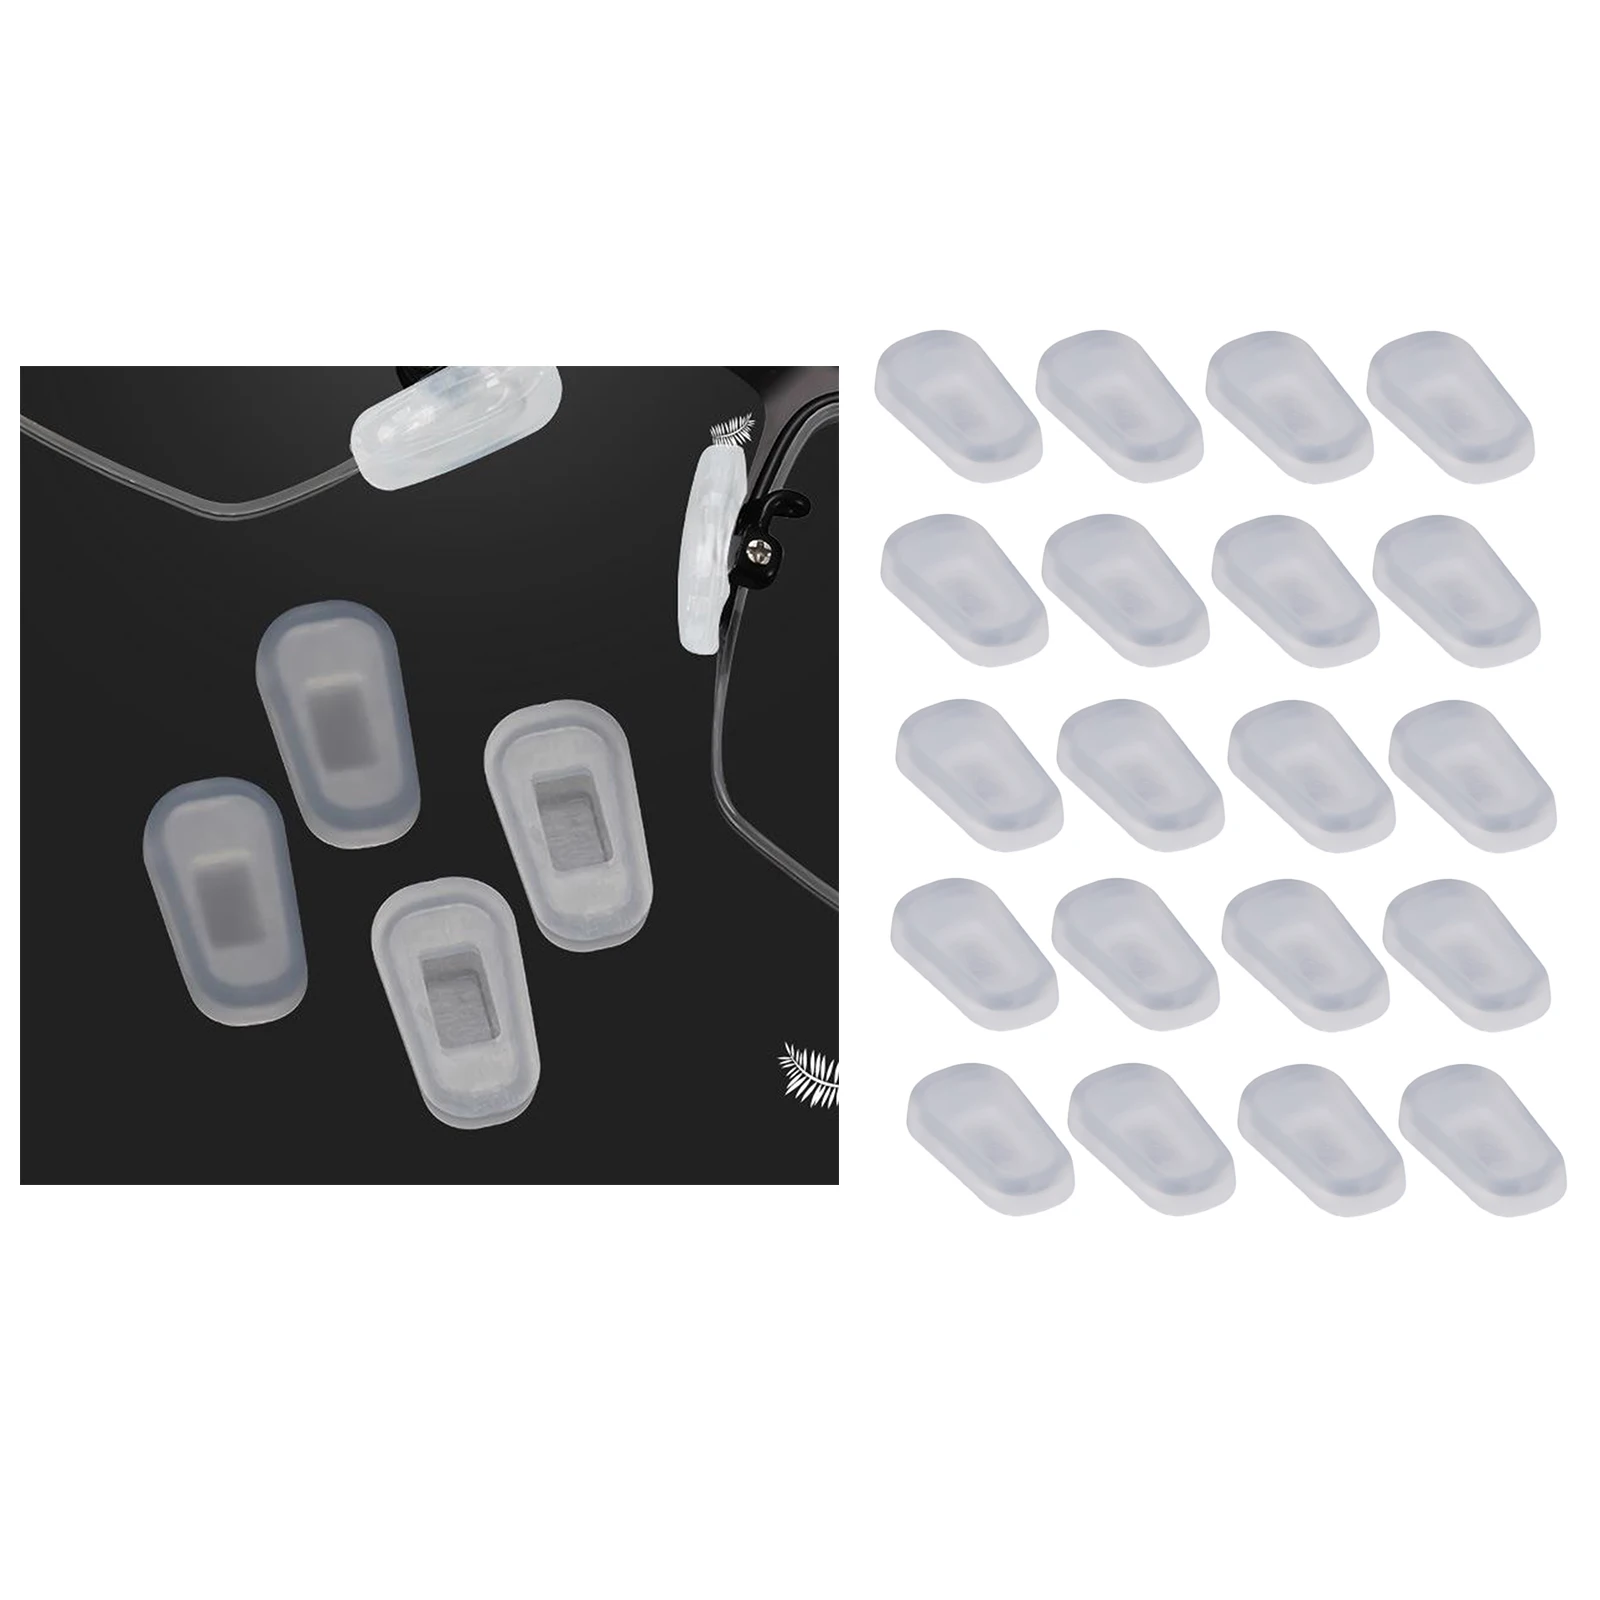 10-Pairs Soft Silicone Eyeglasses Glasses Nose Pads Nosepads Replacement Eyeglasses Pads Anti-Slip Adhesive Nosepads